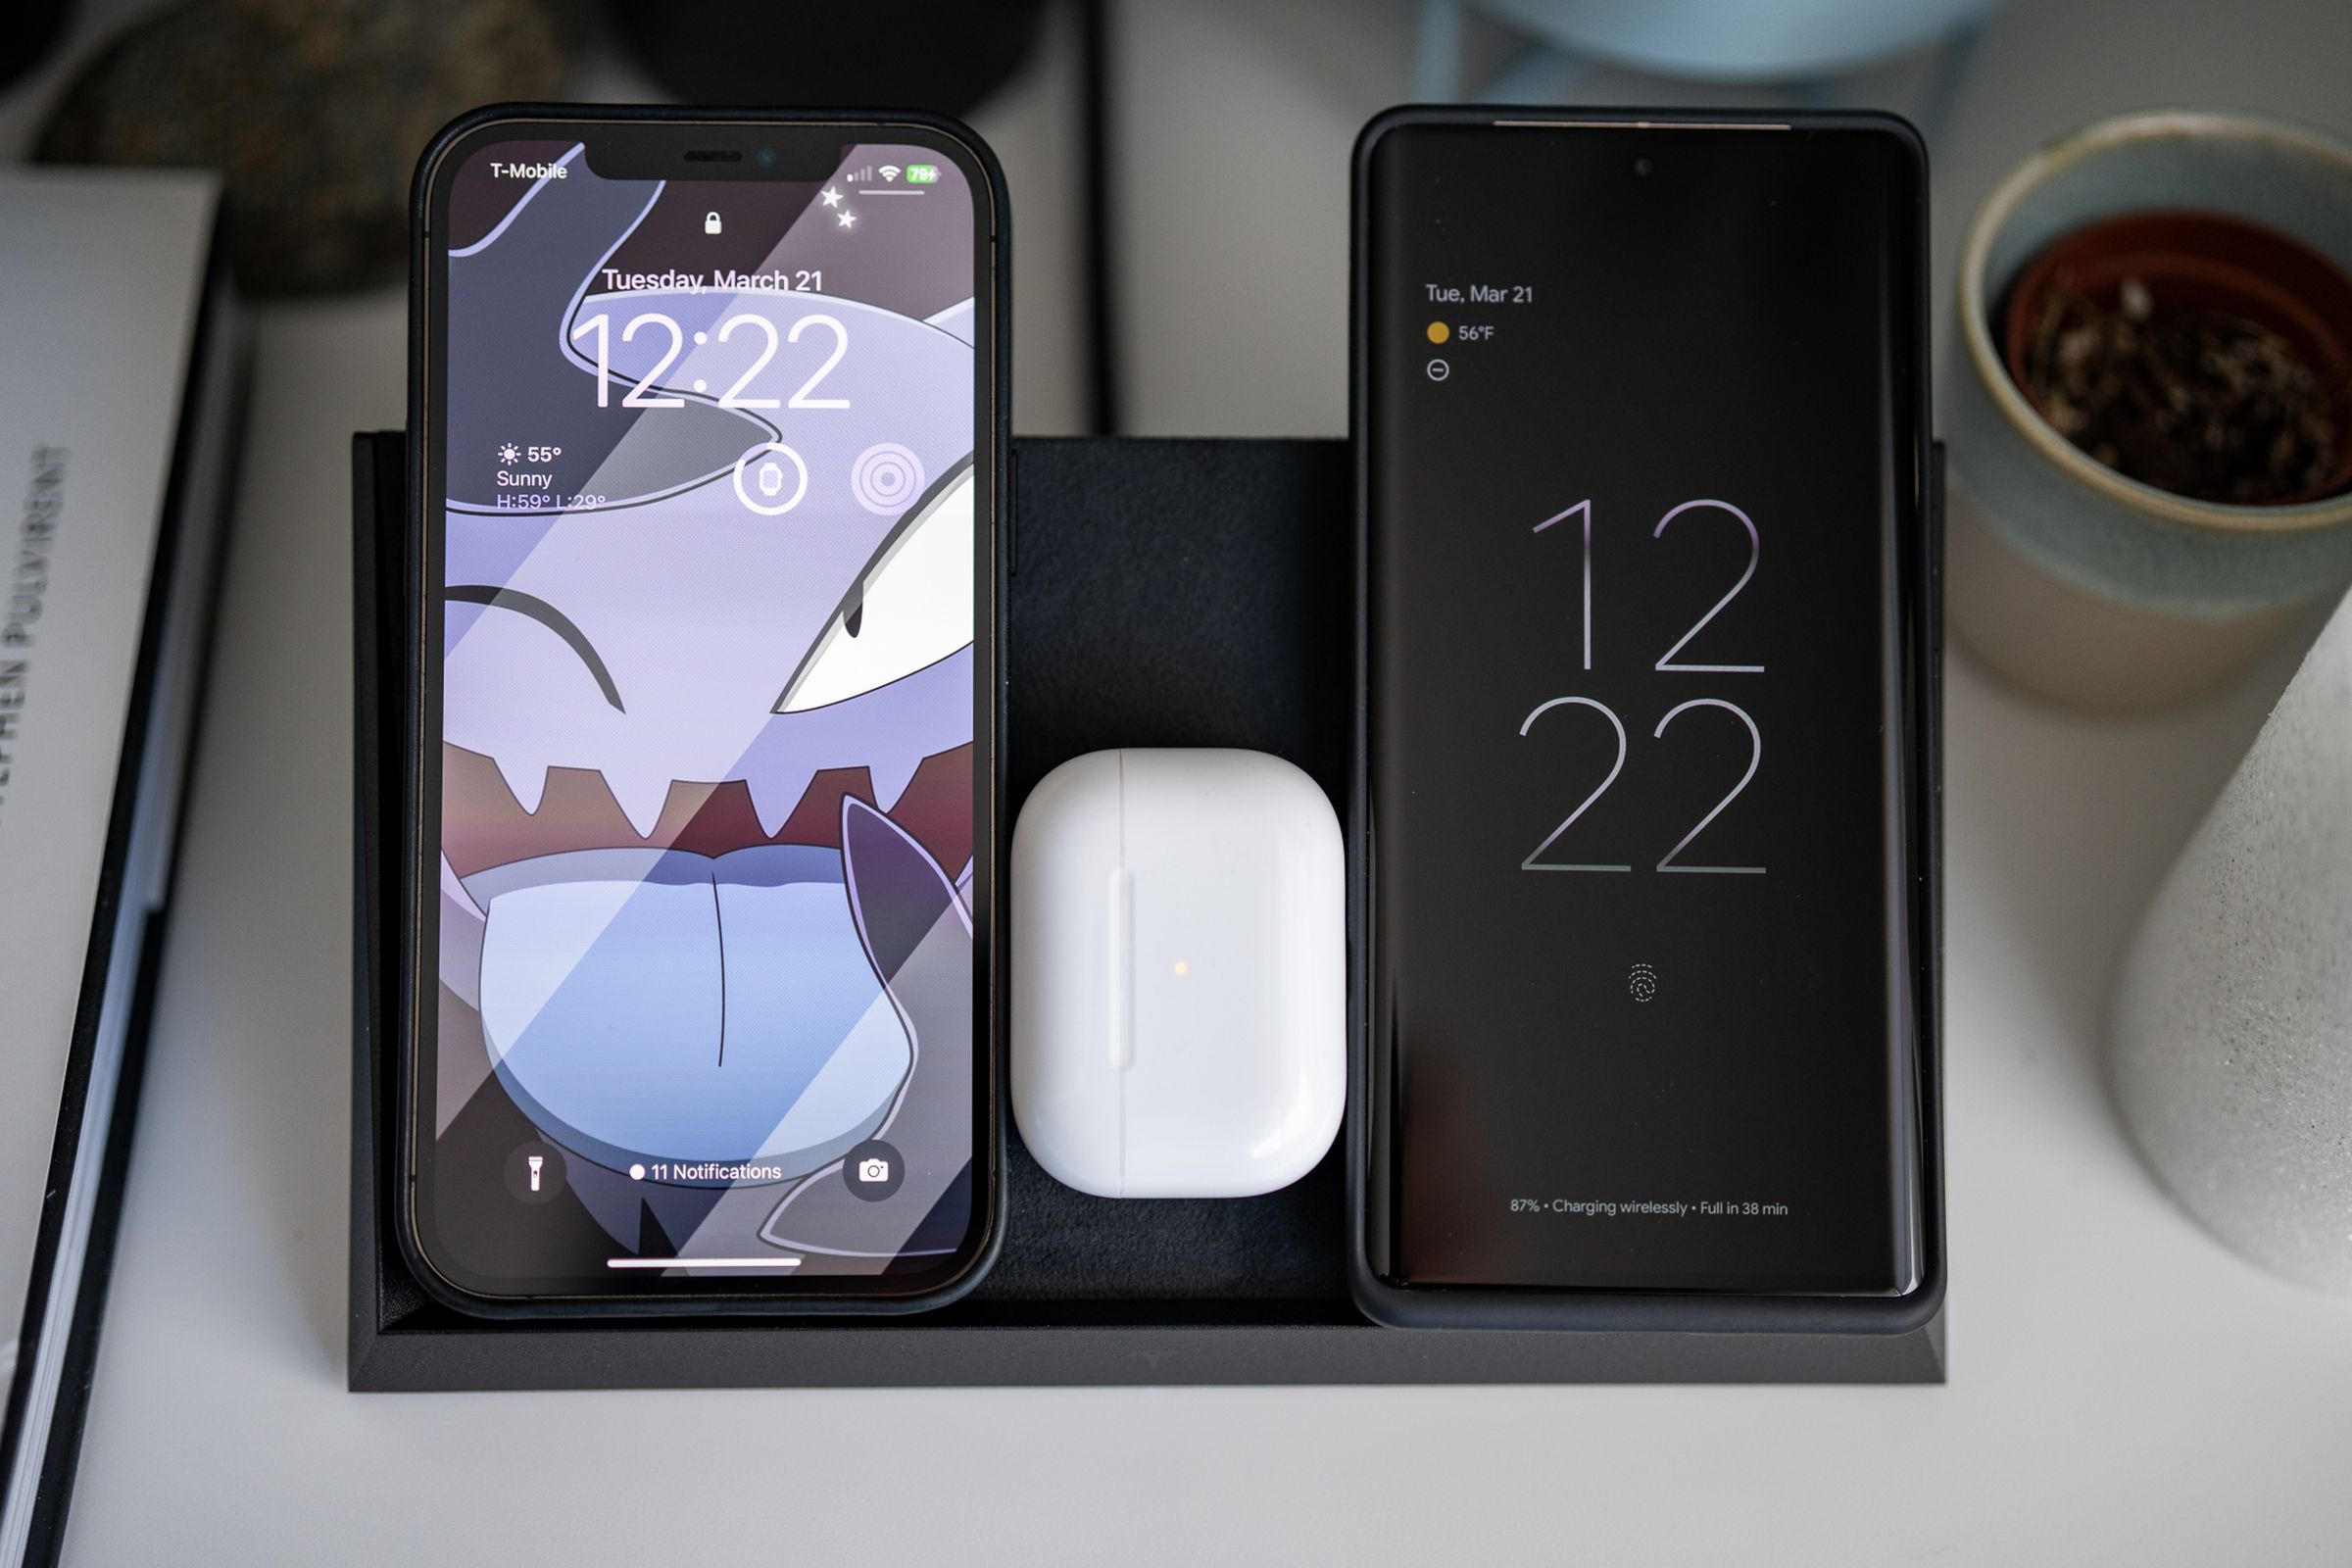 Your three simultaneously charging devices could, in theory, be a trio of phones. But with the size of most phones today, it’s likely going to be a pair and some earbuds that juuust fit.